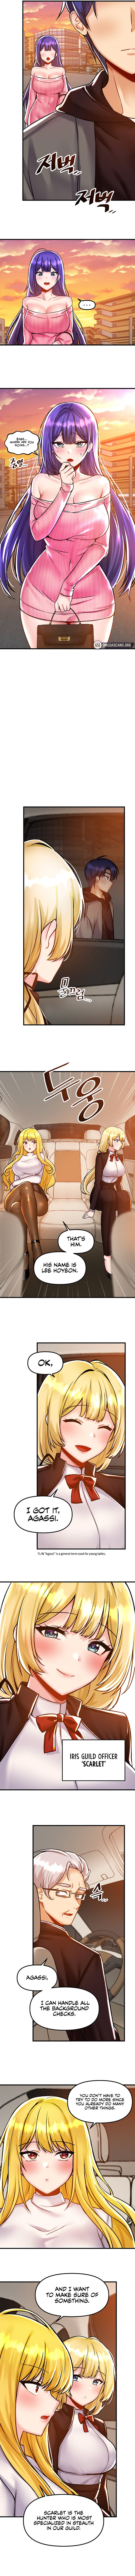 trapped-in-the-academys-eroge-chap-40-4